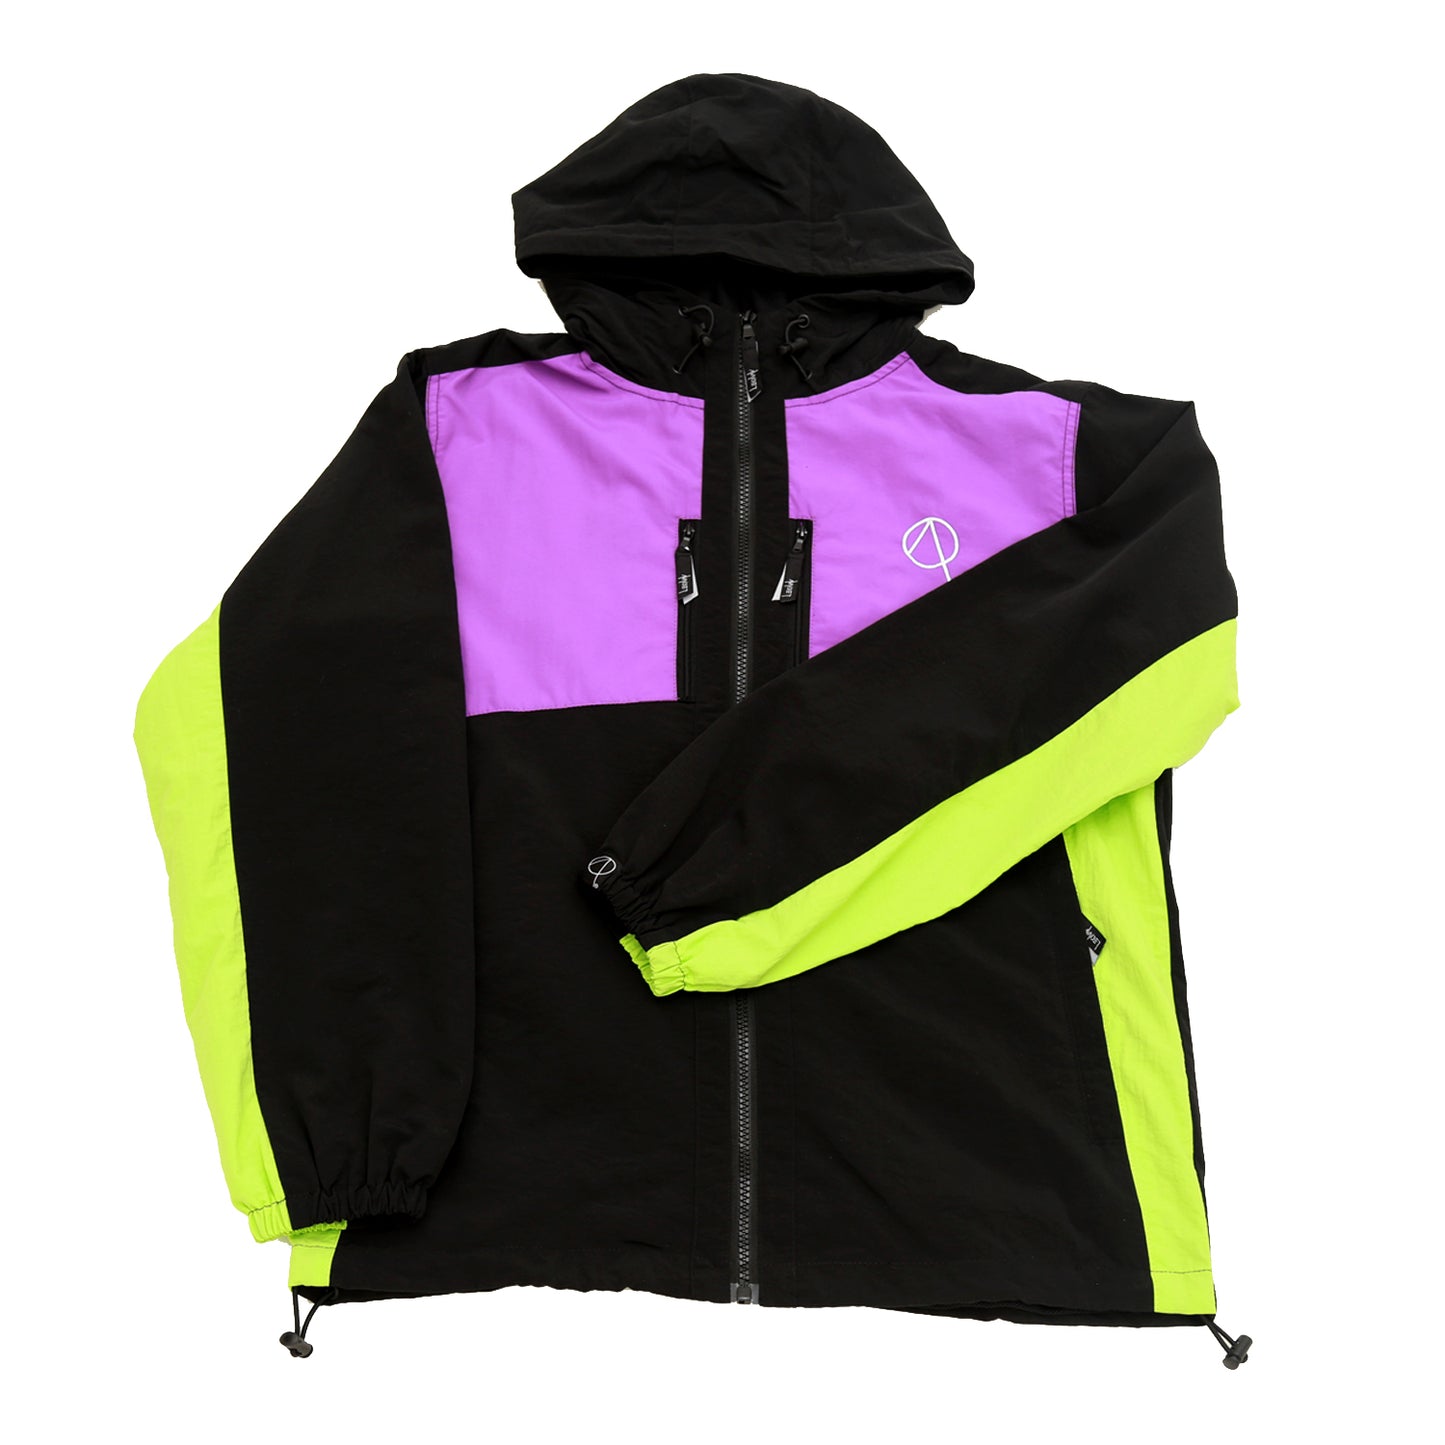 FORREST WINDRUNNER JACKET IN BLACK, PURPLE AND NEON